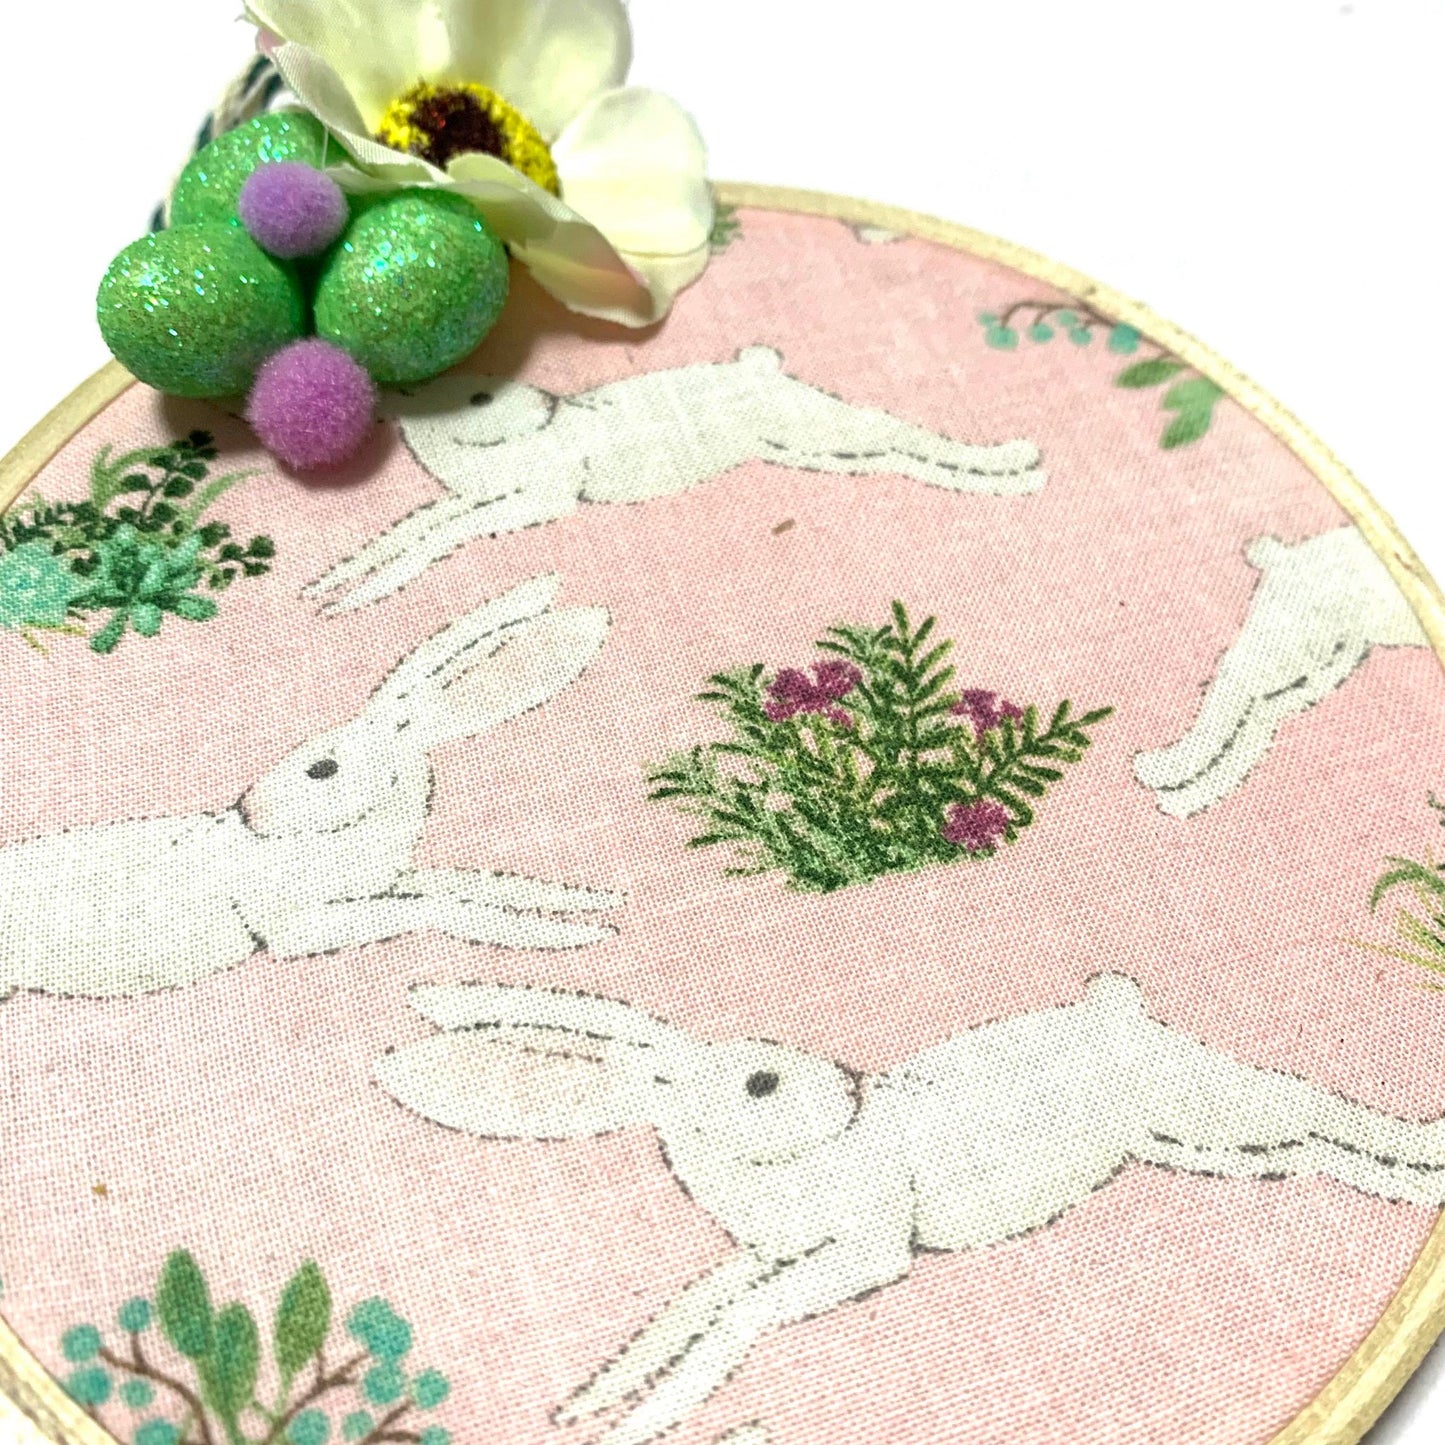 THIS BIRD HAS FLOWN- "Bounding Bunnies" Small Embroidery Hoop Easter Decoration